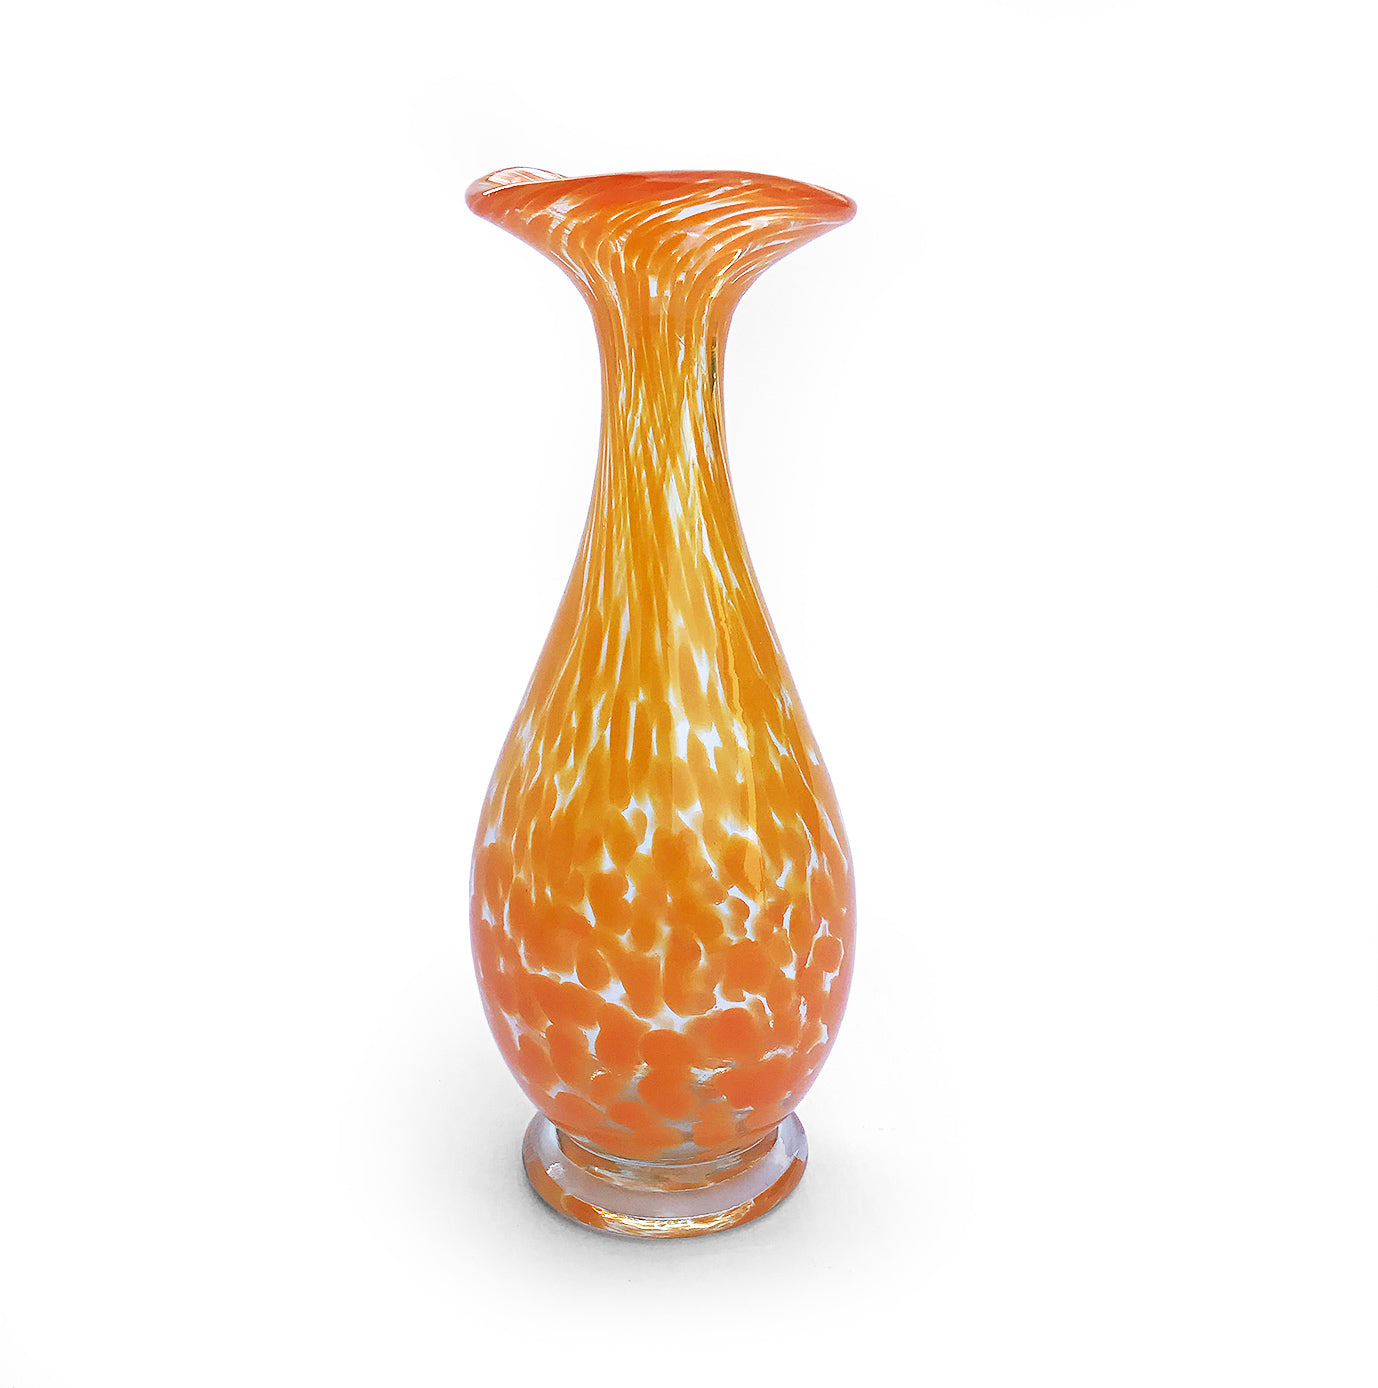 Dappled Yellow Czech Spatter Glass Vase looks stunning in natural light. It's top lip reminiscent of a Lily flower - SHOP NOW - www.intovintage.co.uk